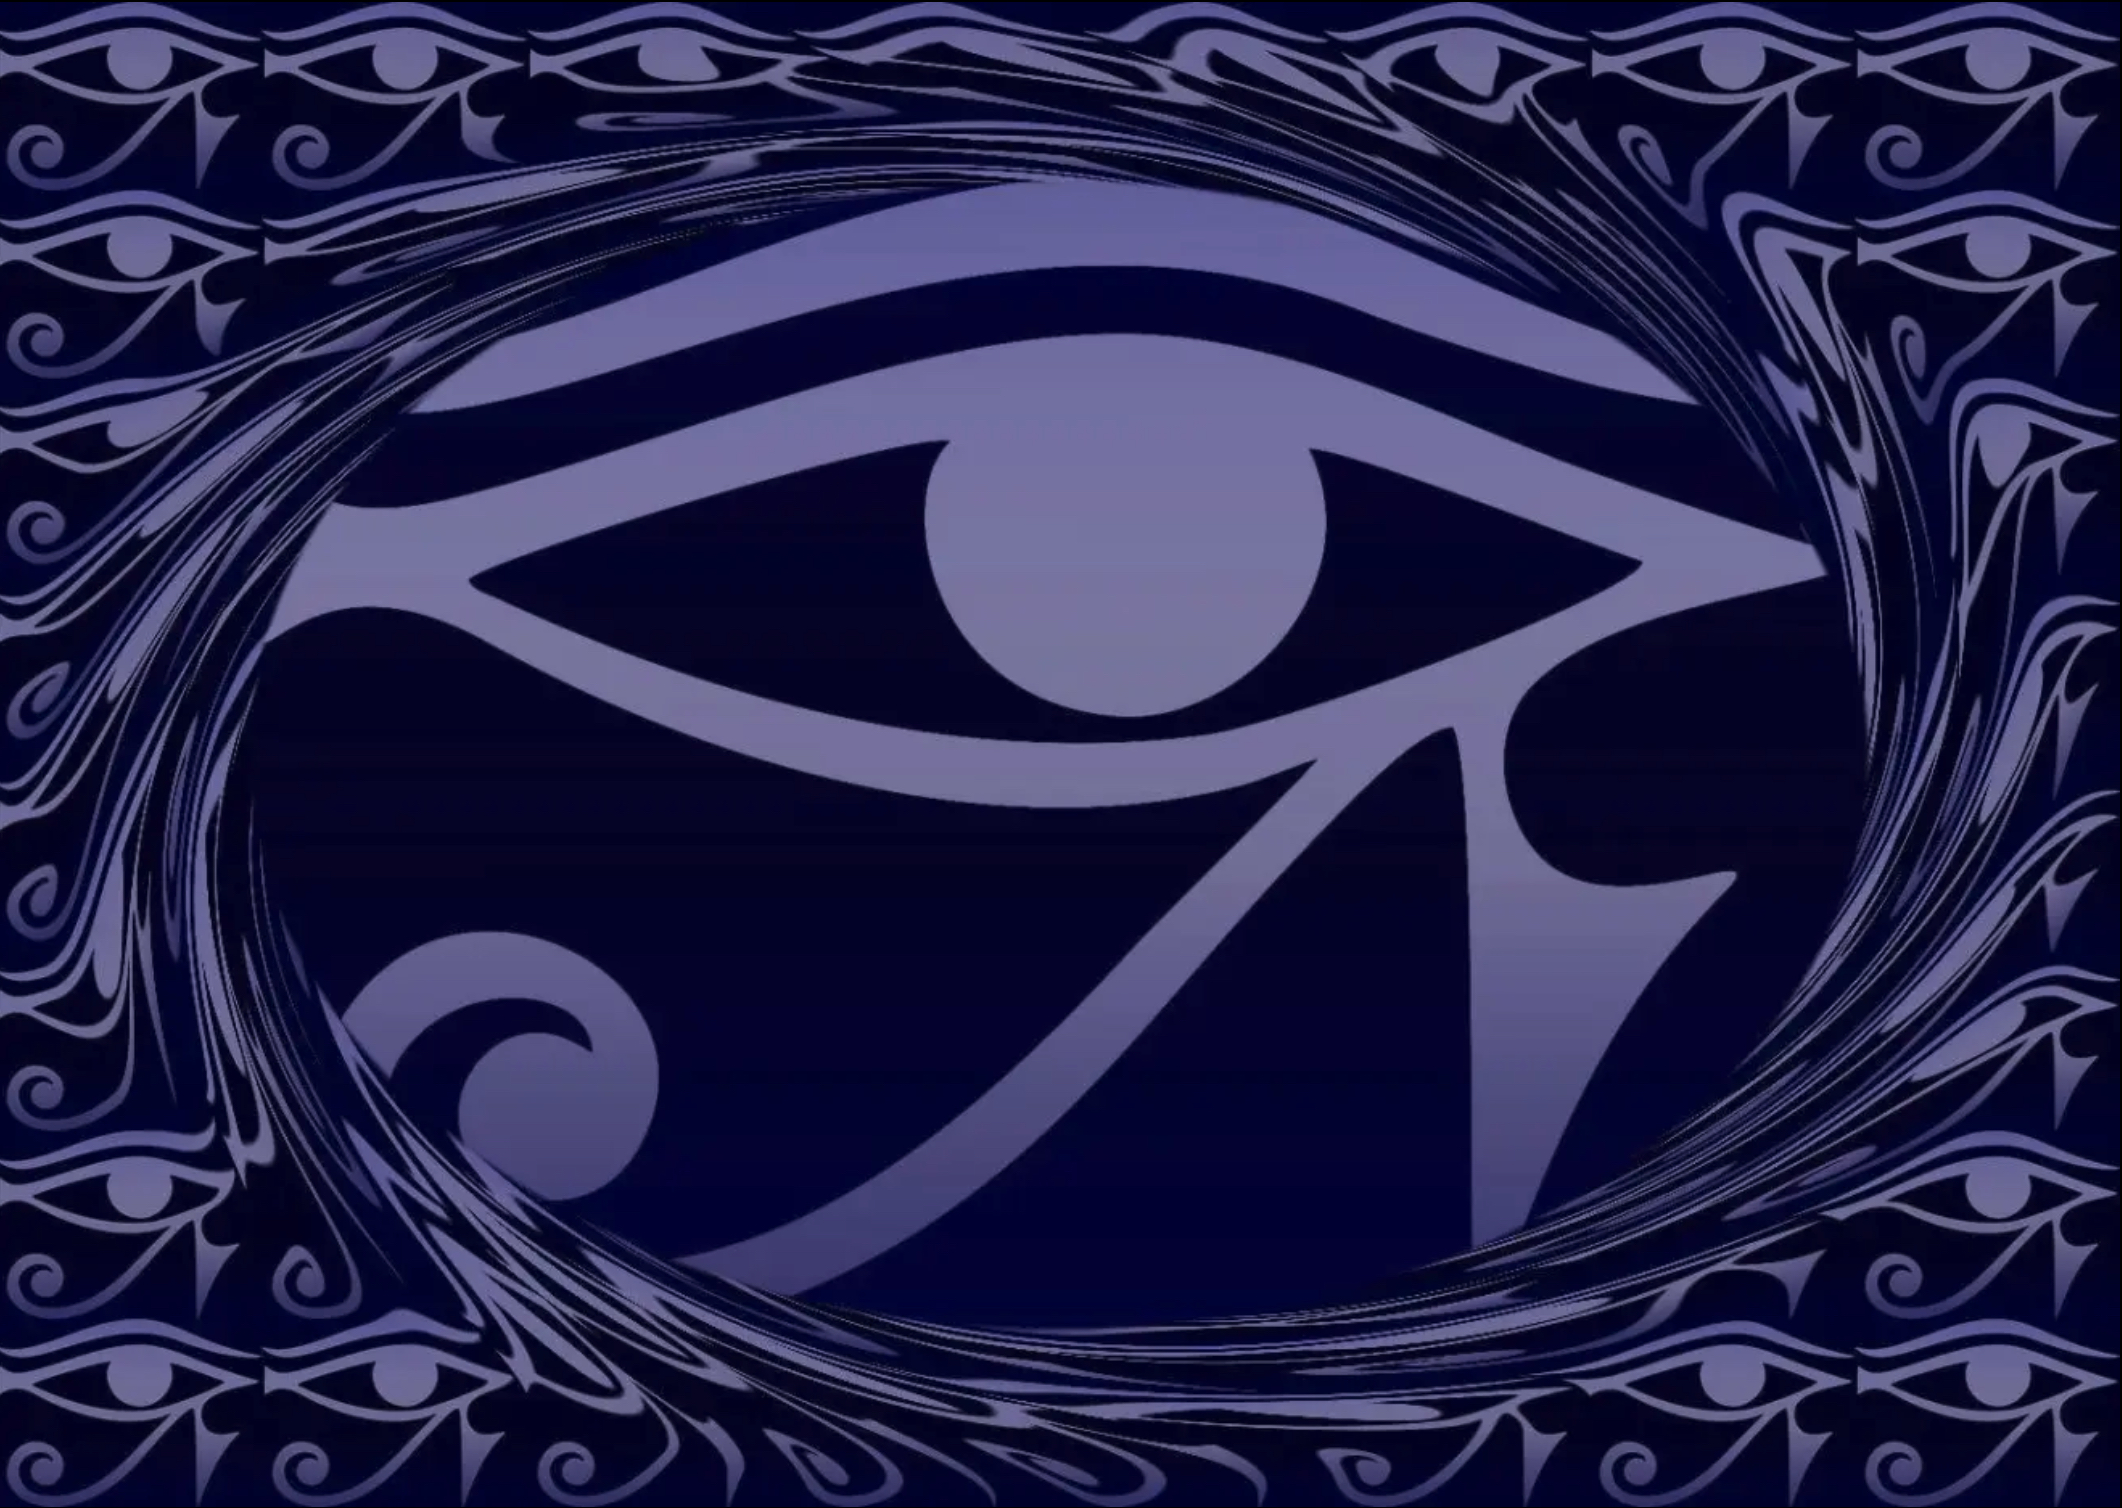 Eye of Horus – reverse Eye of Thoth, Dreamstime.com-ID29356144 Copyright by Lavalova, tiled swirl effect created by Tuxpi.com